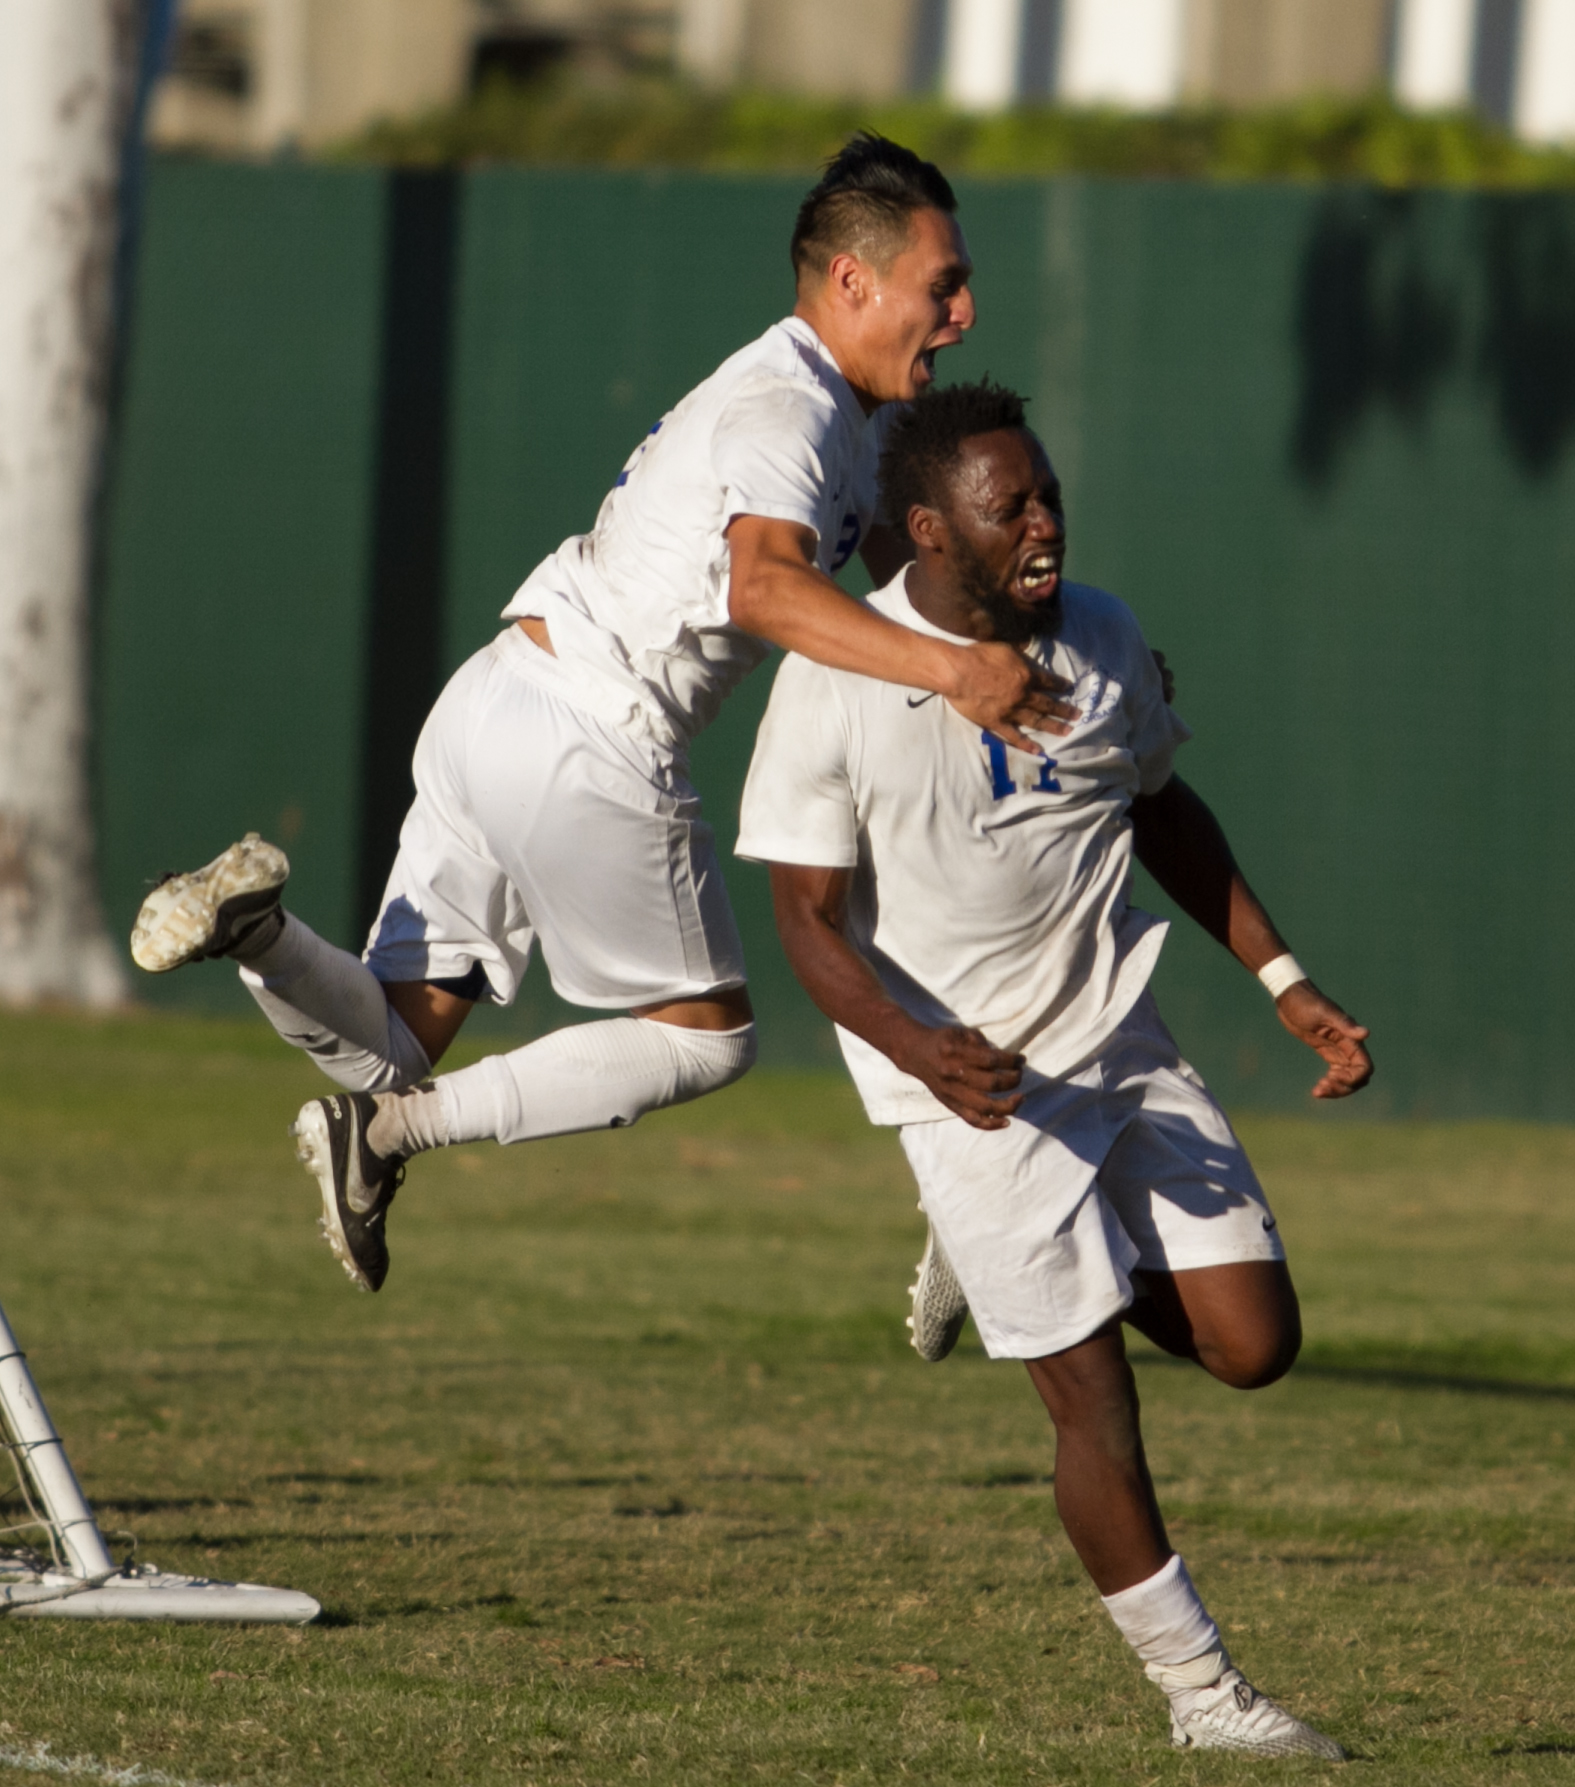  Santa Monica College Corsair Cyrille Njomo (17)(R) celebrates after scoring a goal with his teammate Chris Negrete (9)(L) during the match against Cerritos College on Wednesday, November 22, 2017, at Cerritos College in Norwalk, California. The Cors